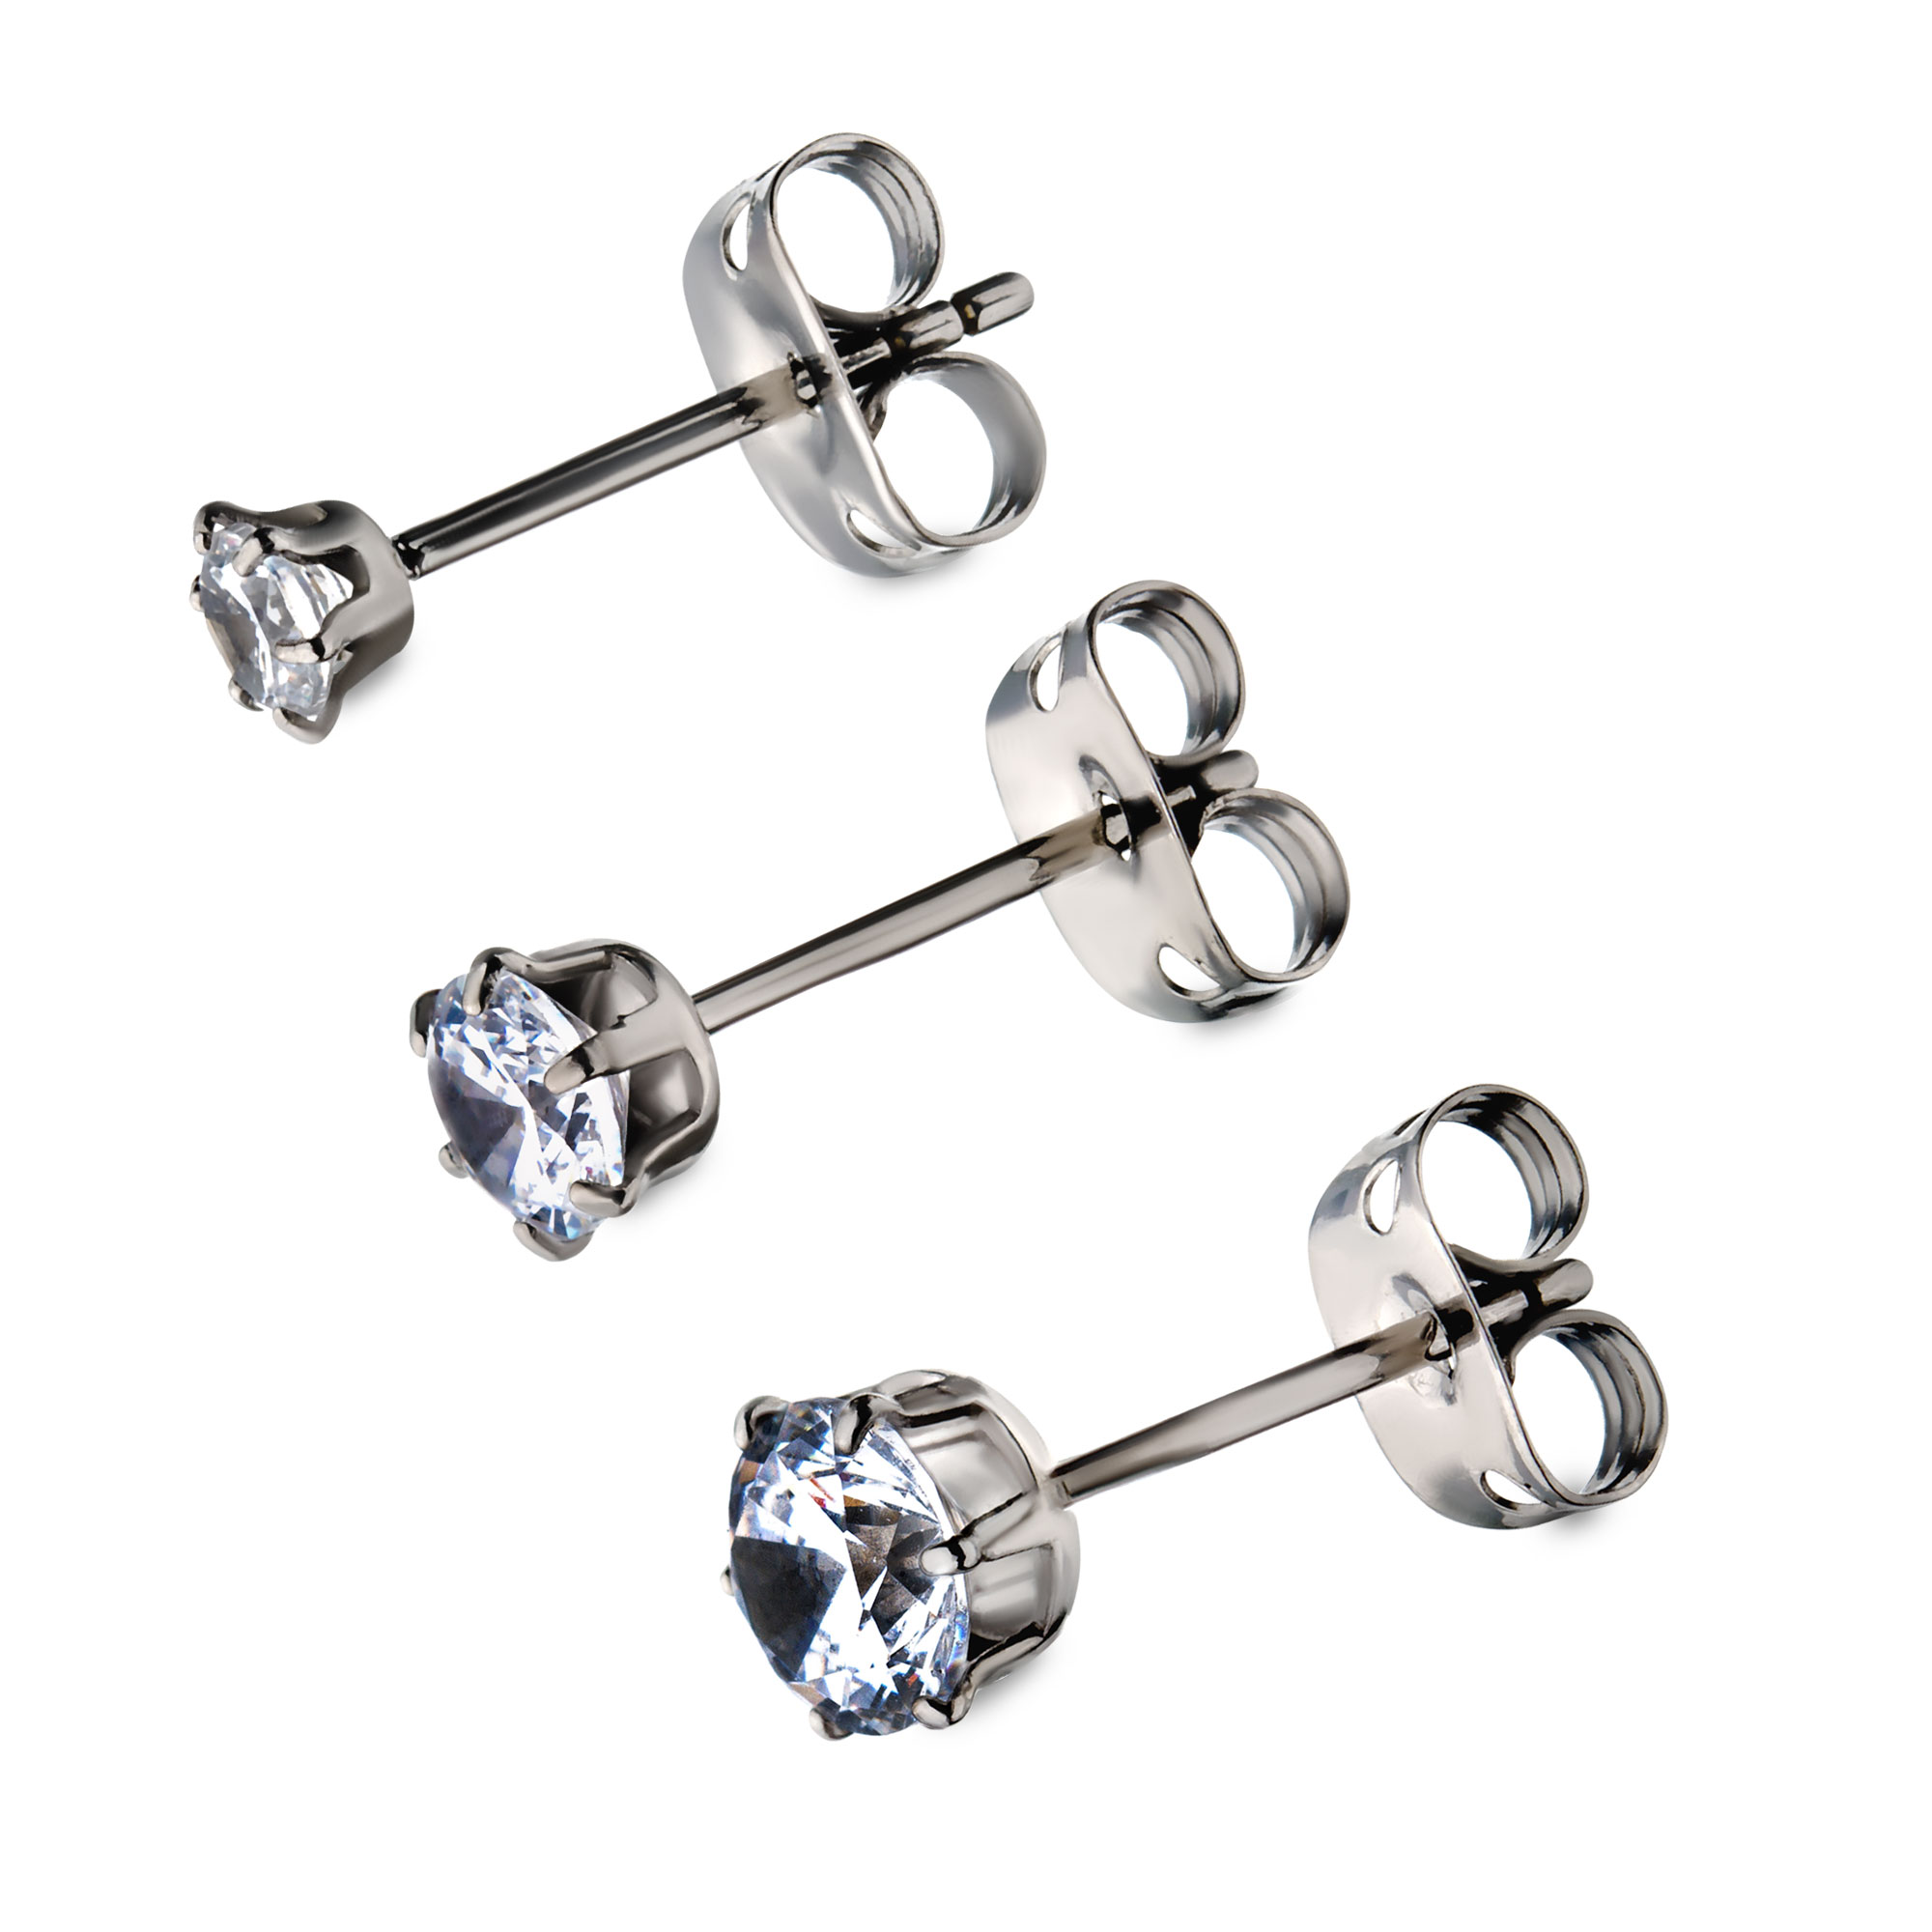 20g Titanium Post and Butterfly Back with Prong Set CZ Stud Earrings Image 2 Morin Jewelers Southbridge, MA